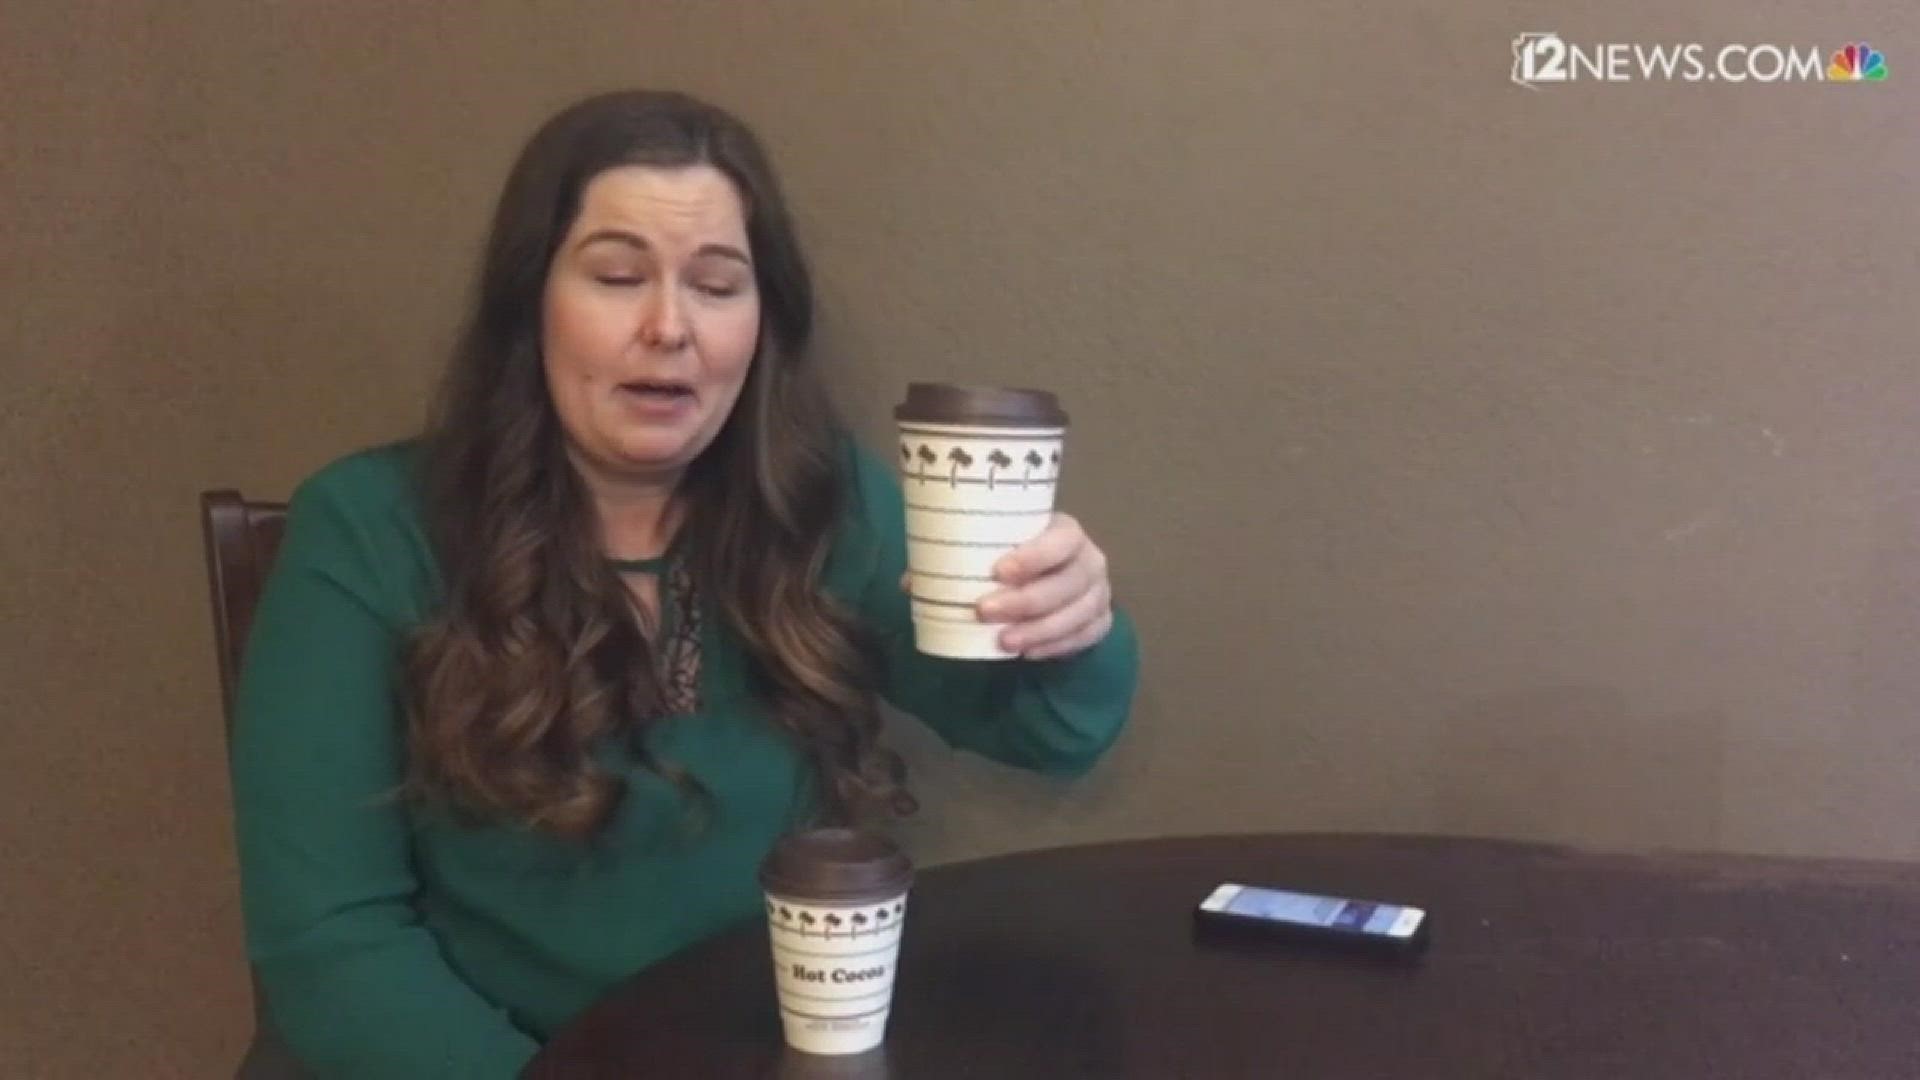 12 News' Anne Stegen reviews In-N-Out's hot cocoa.